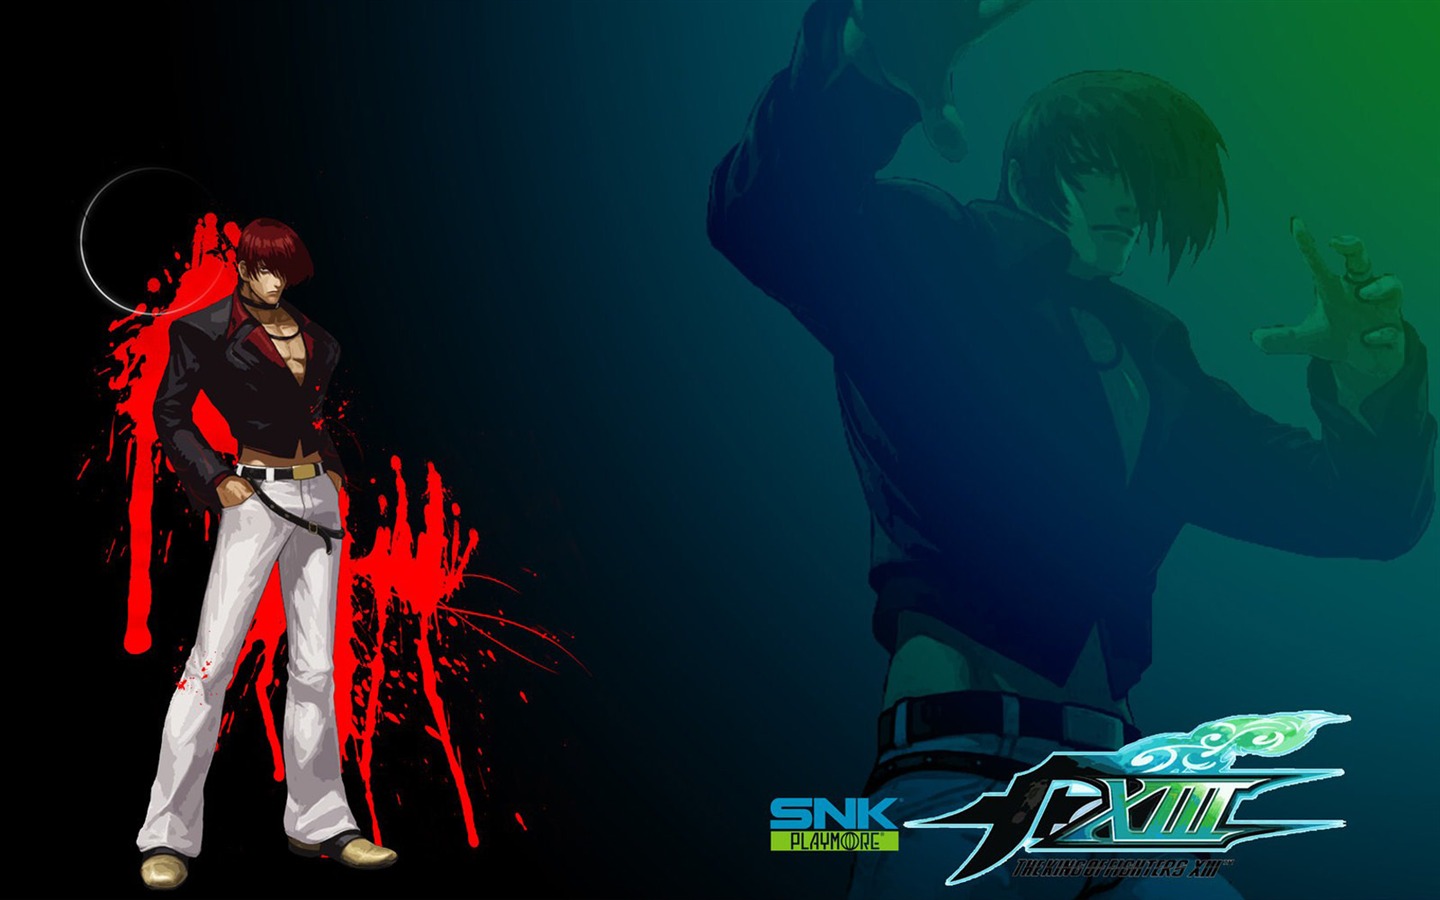 The King of Fighters XIII wallpapers #12 - 1440x900